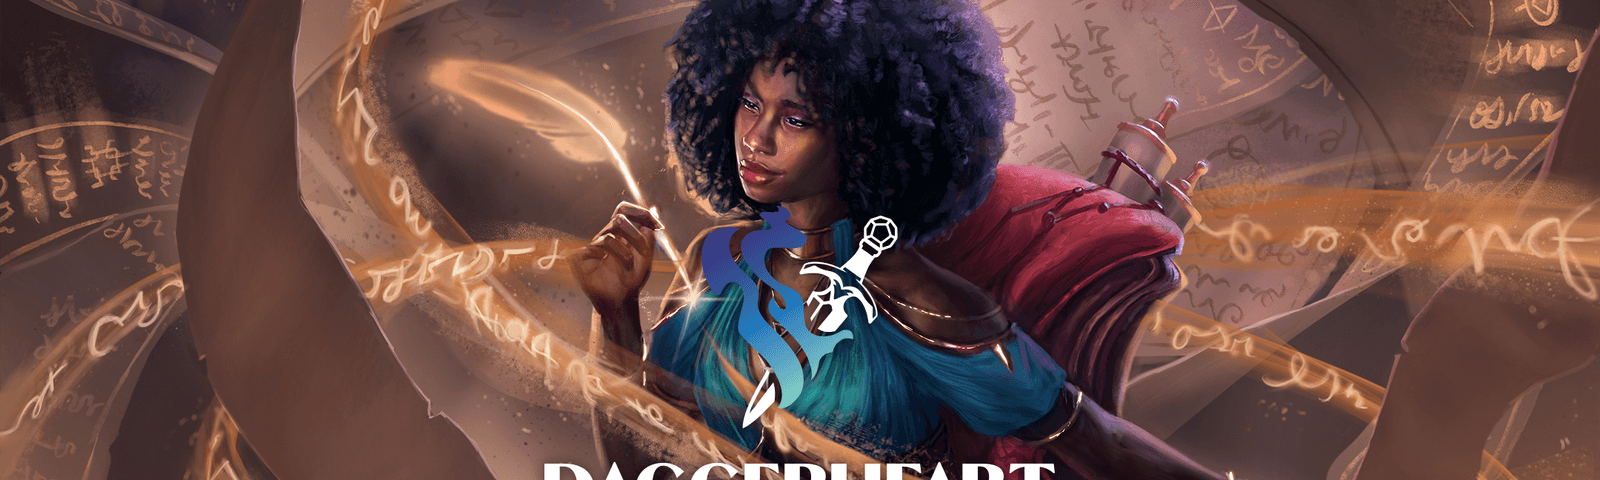 Promotional picture of a Daggerheart character behind the Daggerheart logo. The characters is a black woman in a wooden wheelchair using a glowing quill to write magic words in the air. The woman has a black afro hairstyle and wears a blue dress with red and gold accents. There are furled scrolls in her lap and in pockets on the back of her chair.